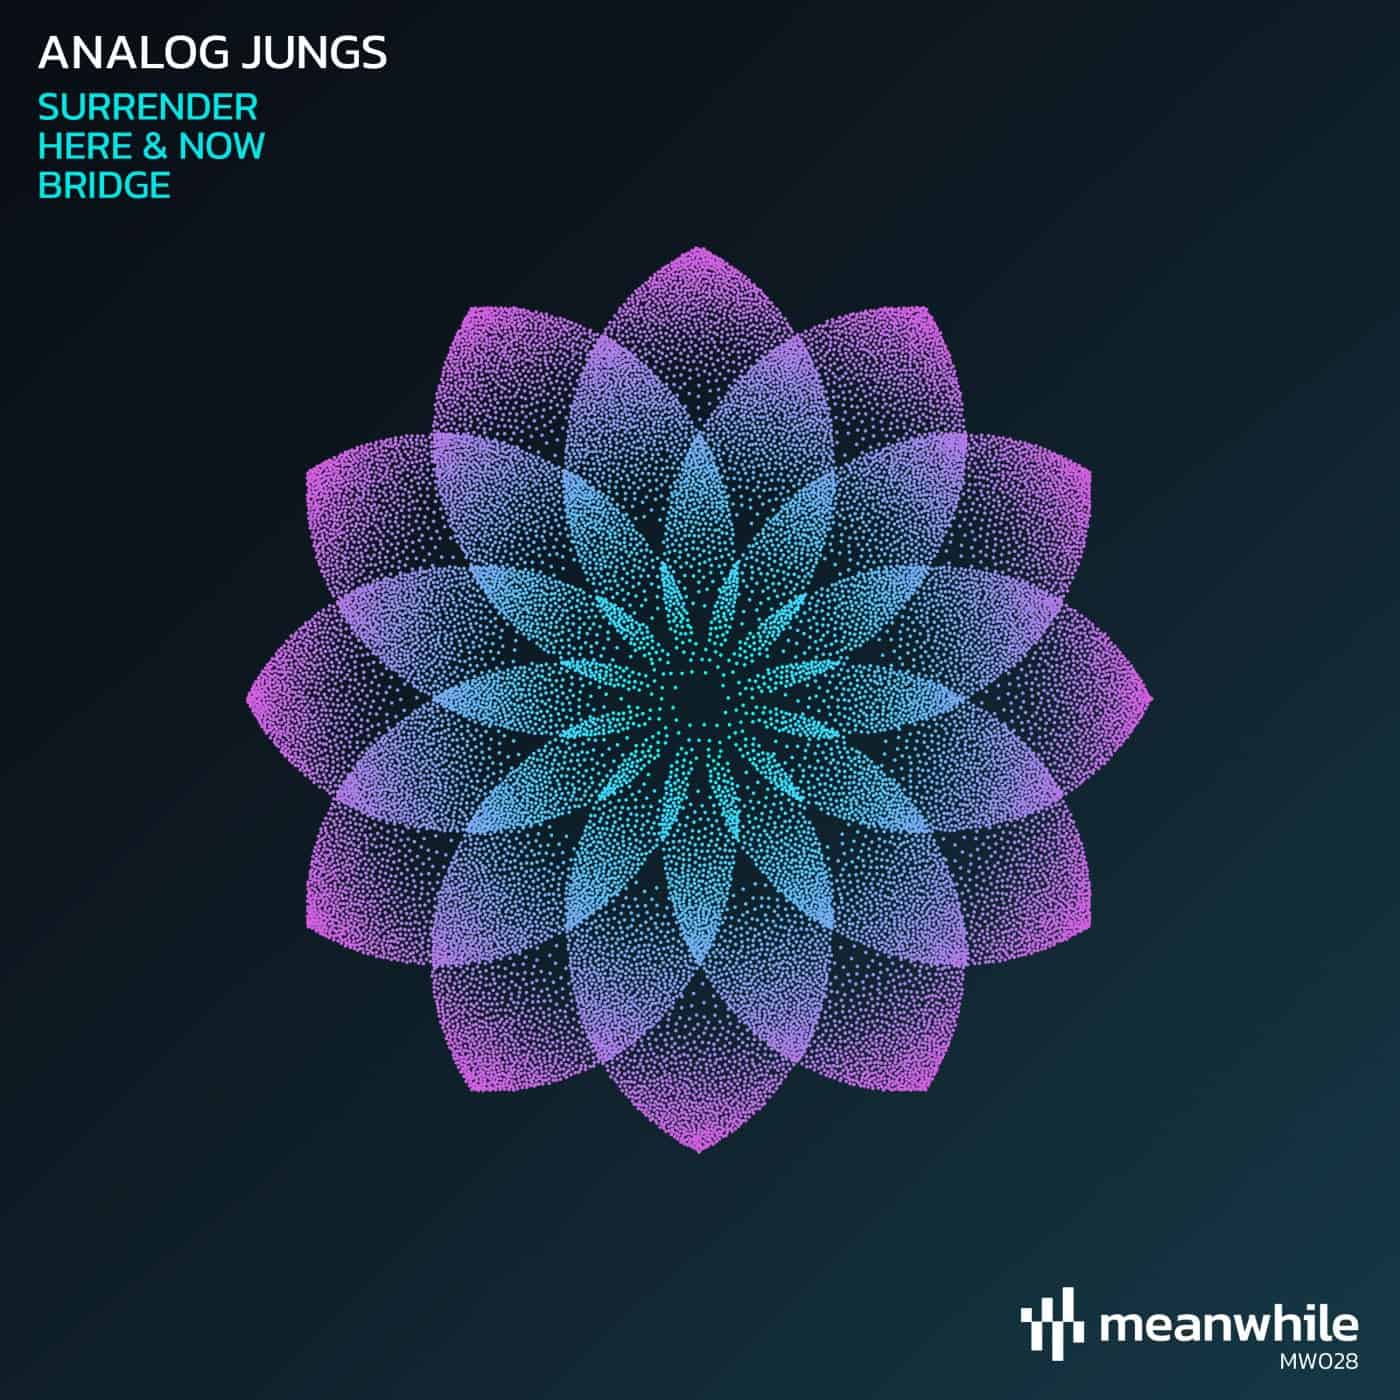 Download Analog Jungs - Surrender on Electrobuzz